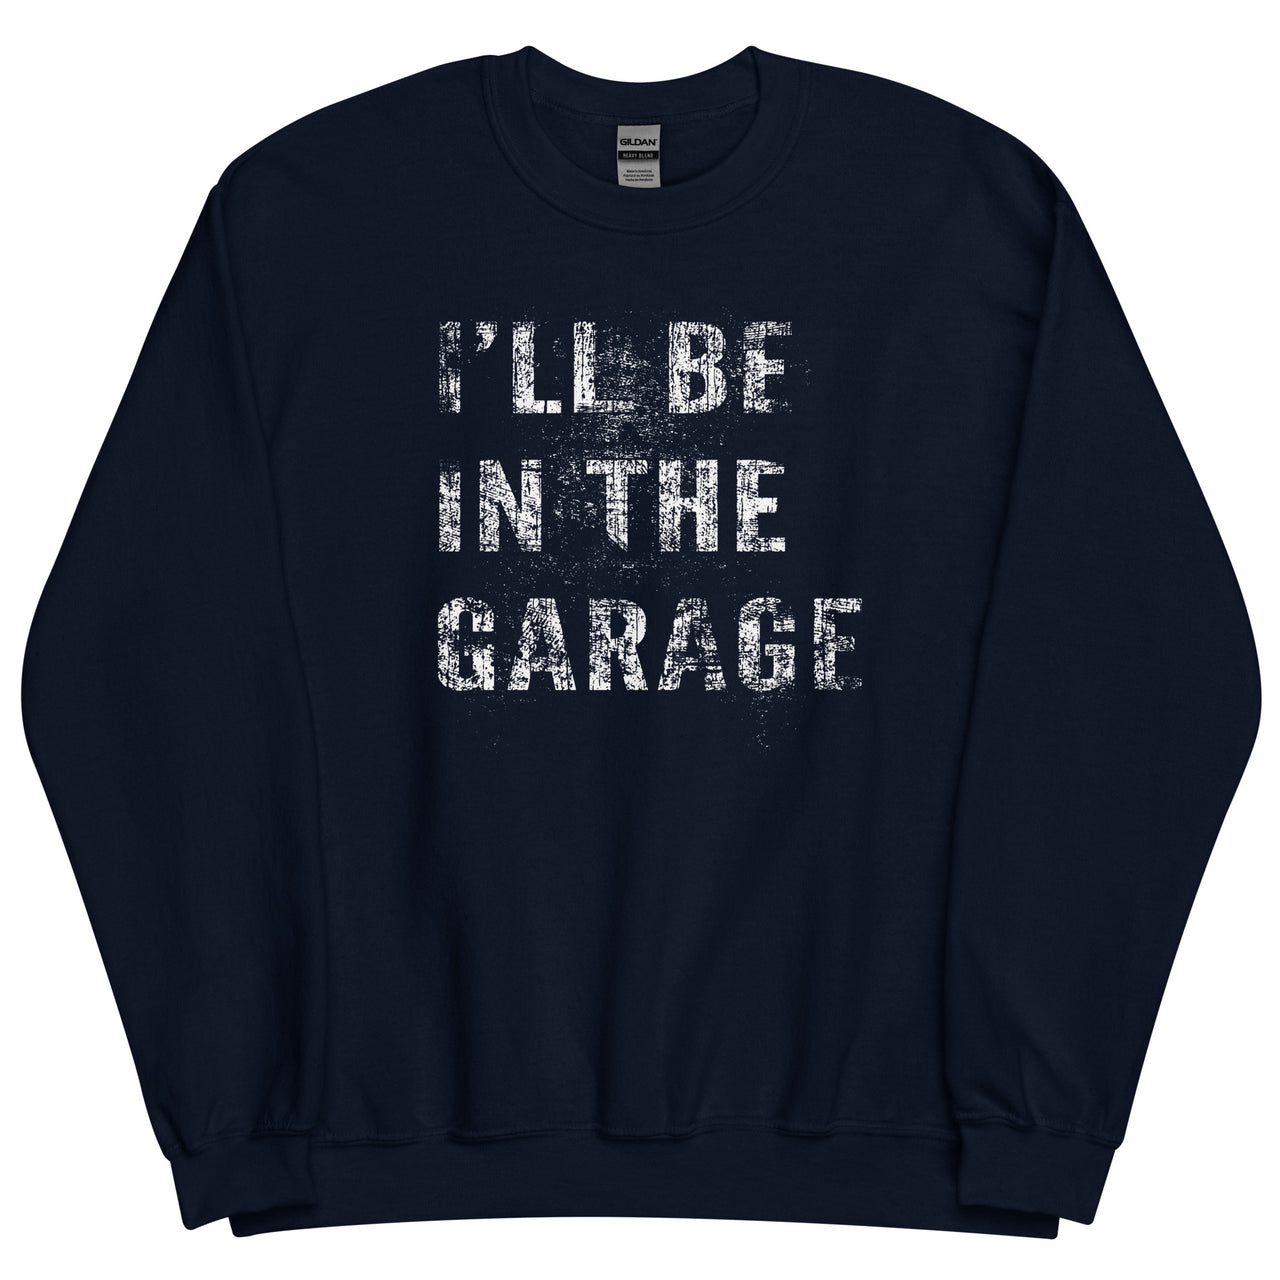 I'll Be In The Garage, Mechanic Sweatshirt , Car Enthusiast Crew Neck Pullover in navy